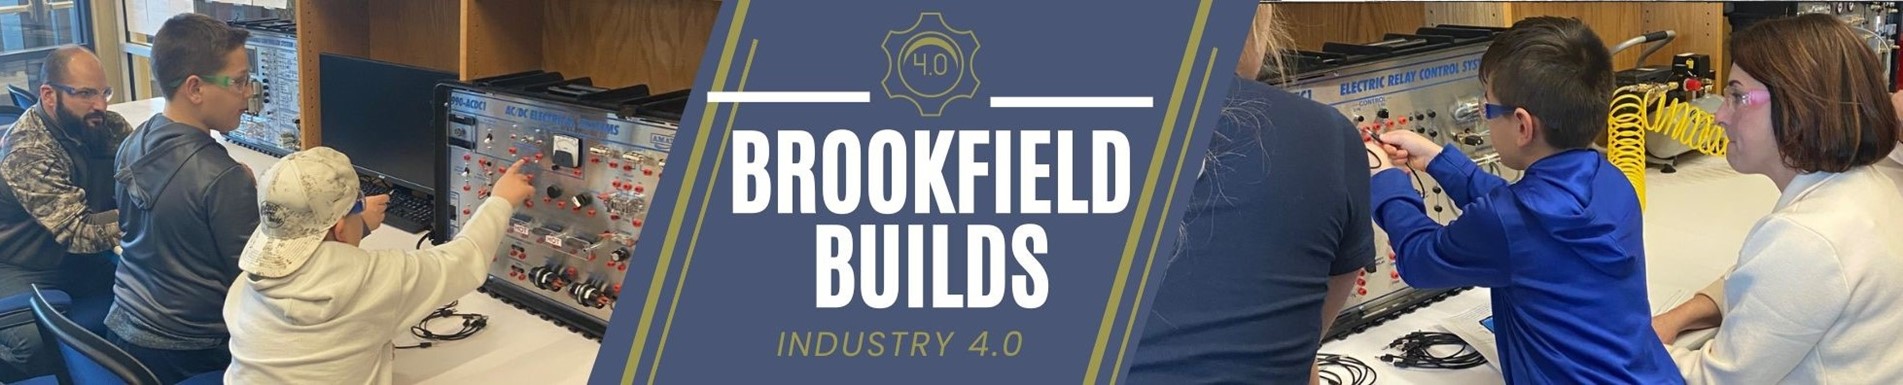 the district hosts families for a Brookfield Builds event with Industry 4.0 equipment